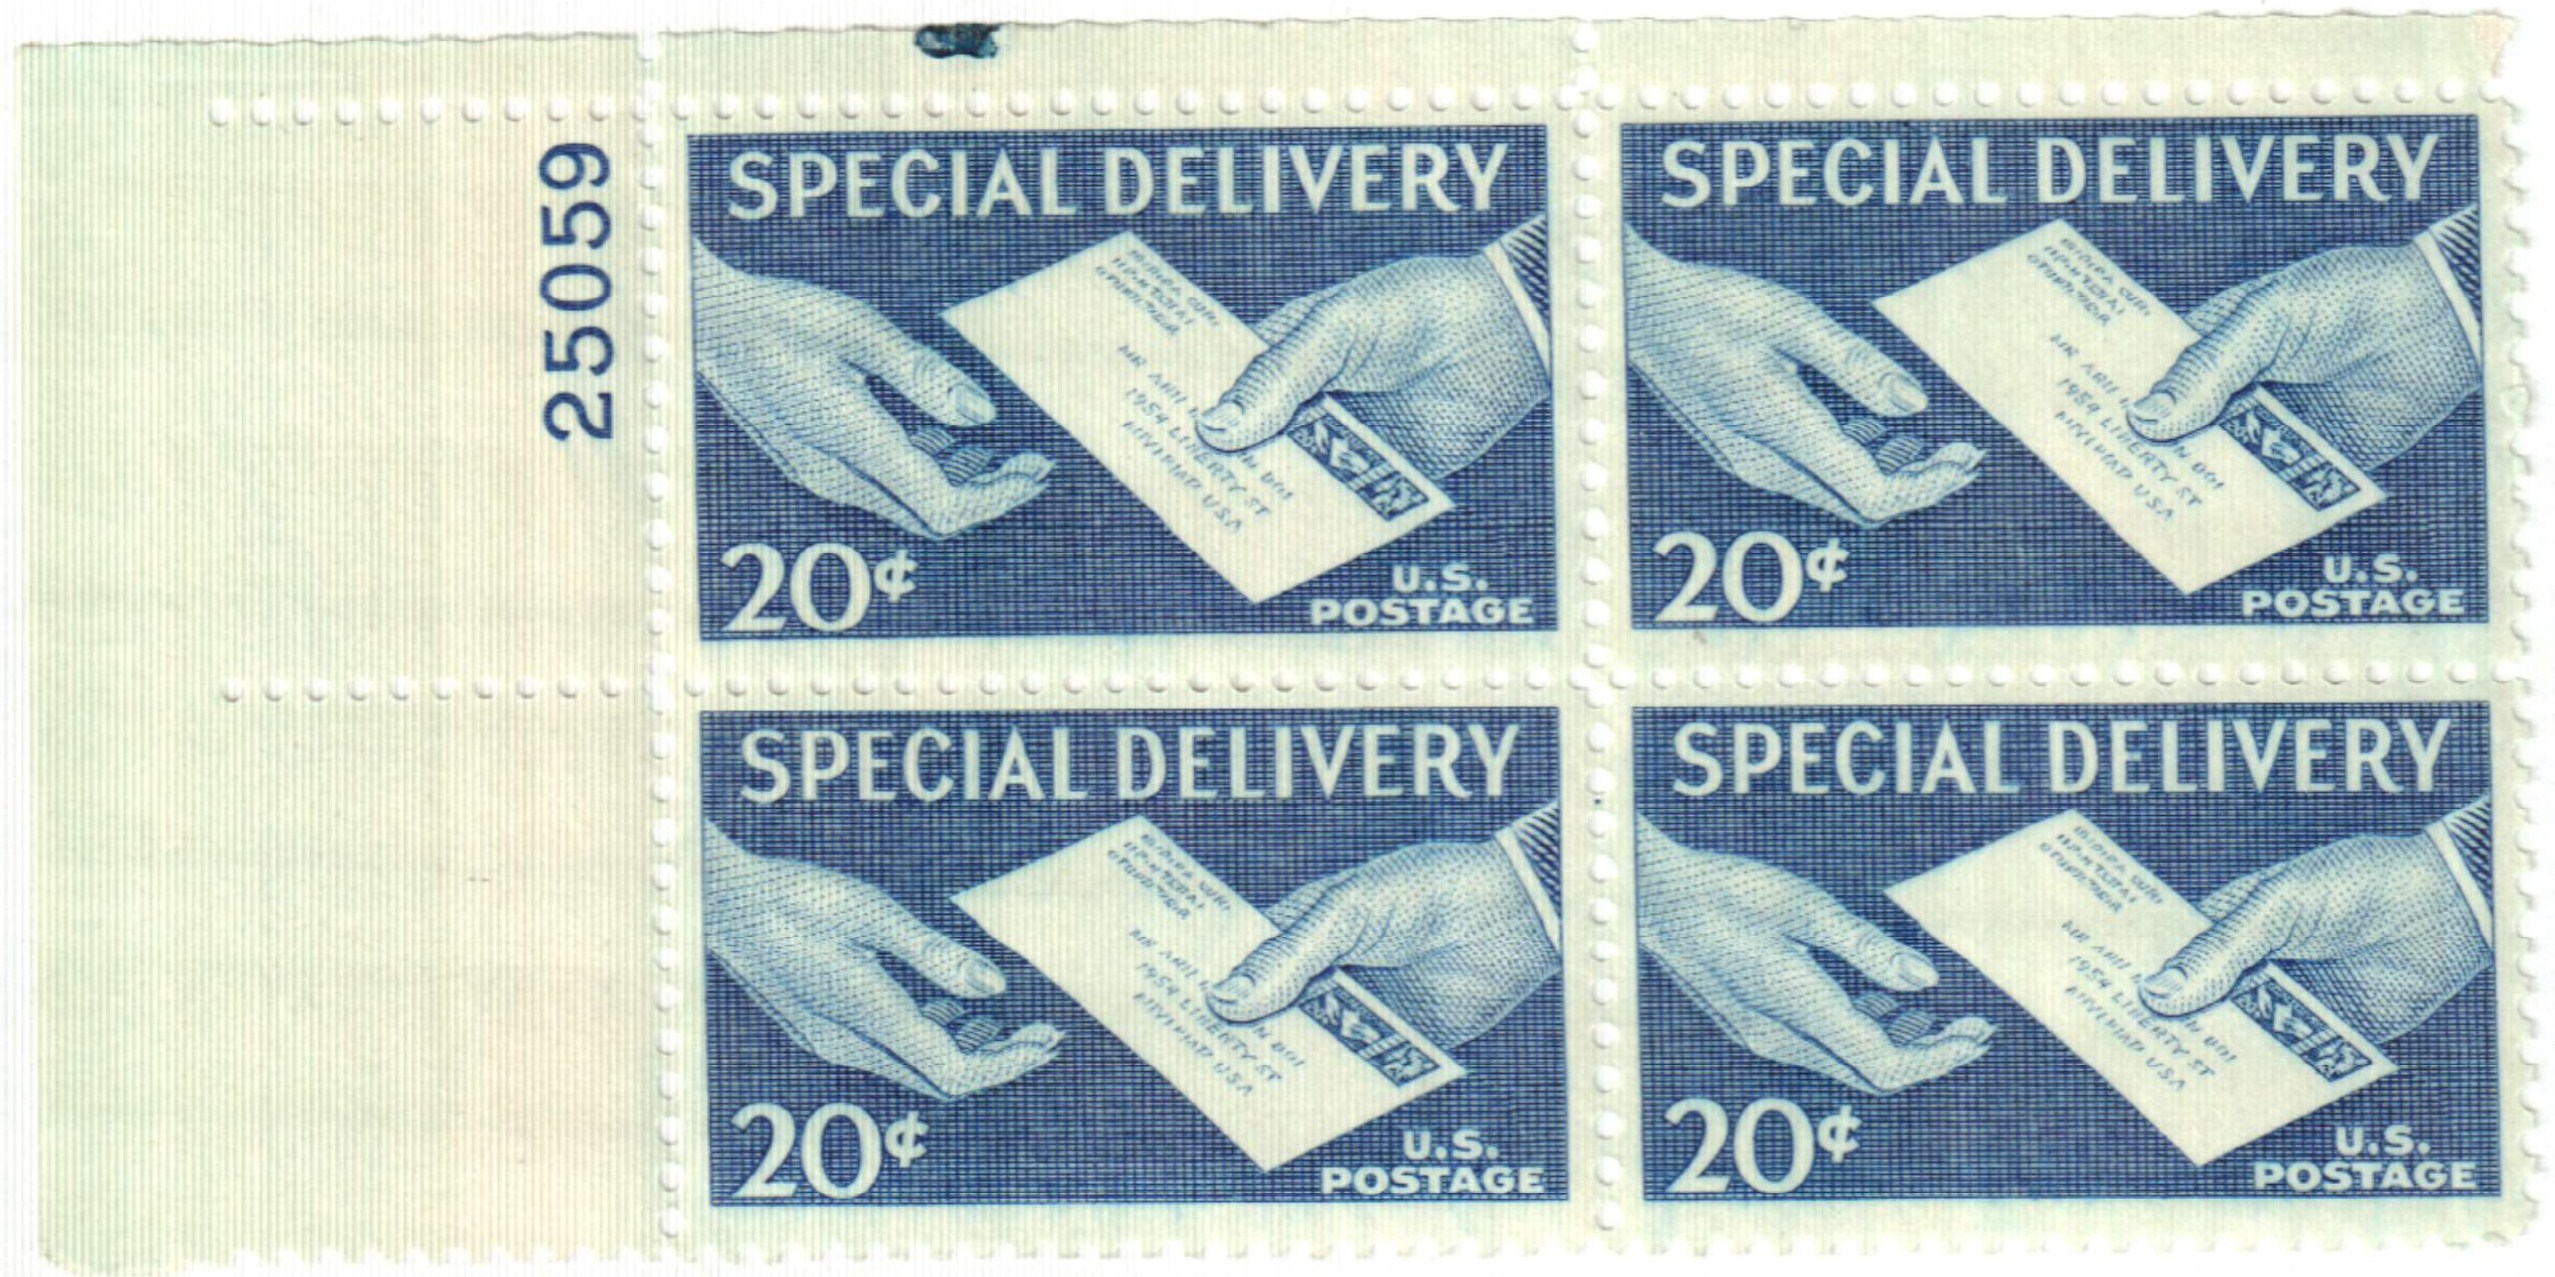 Philippines: 1962 Special Delivery 20 cents stamp, used. Lot # 07-06142